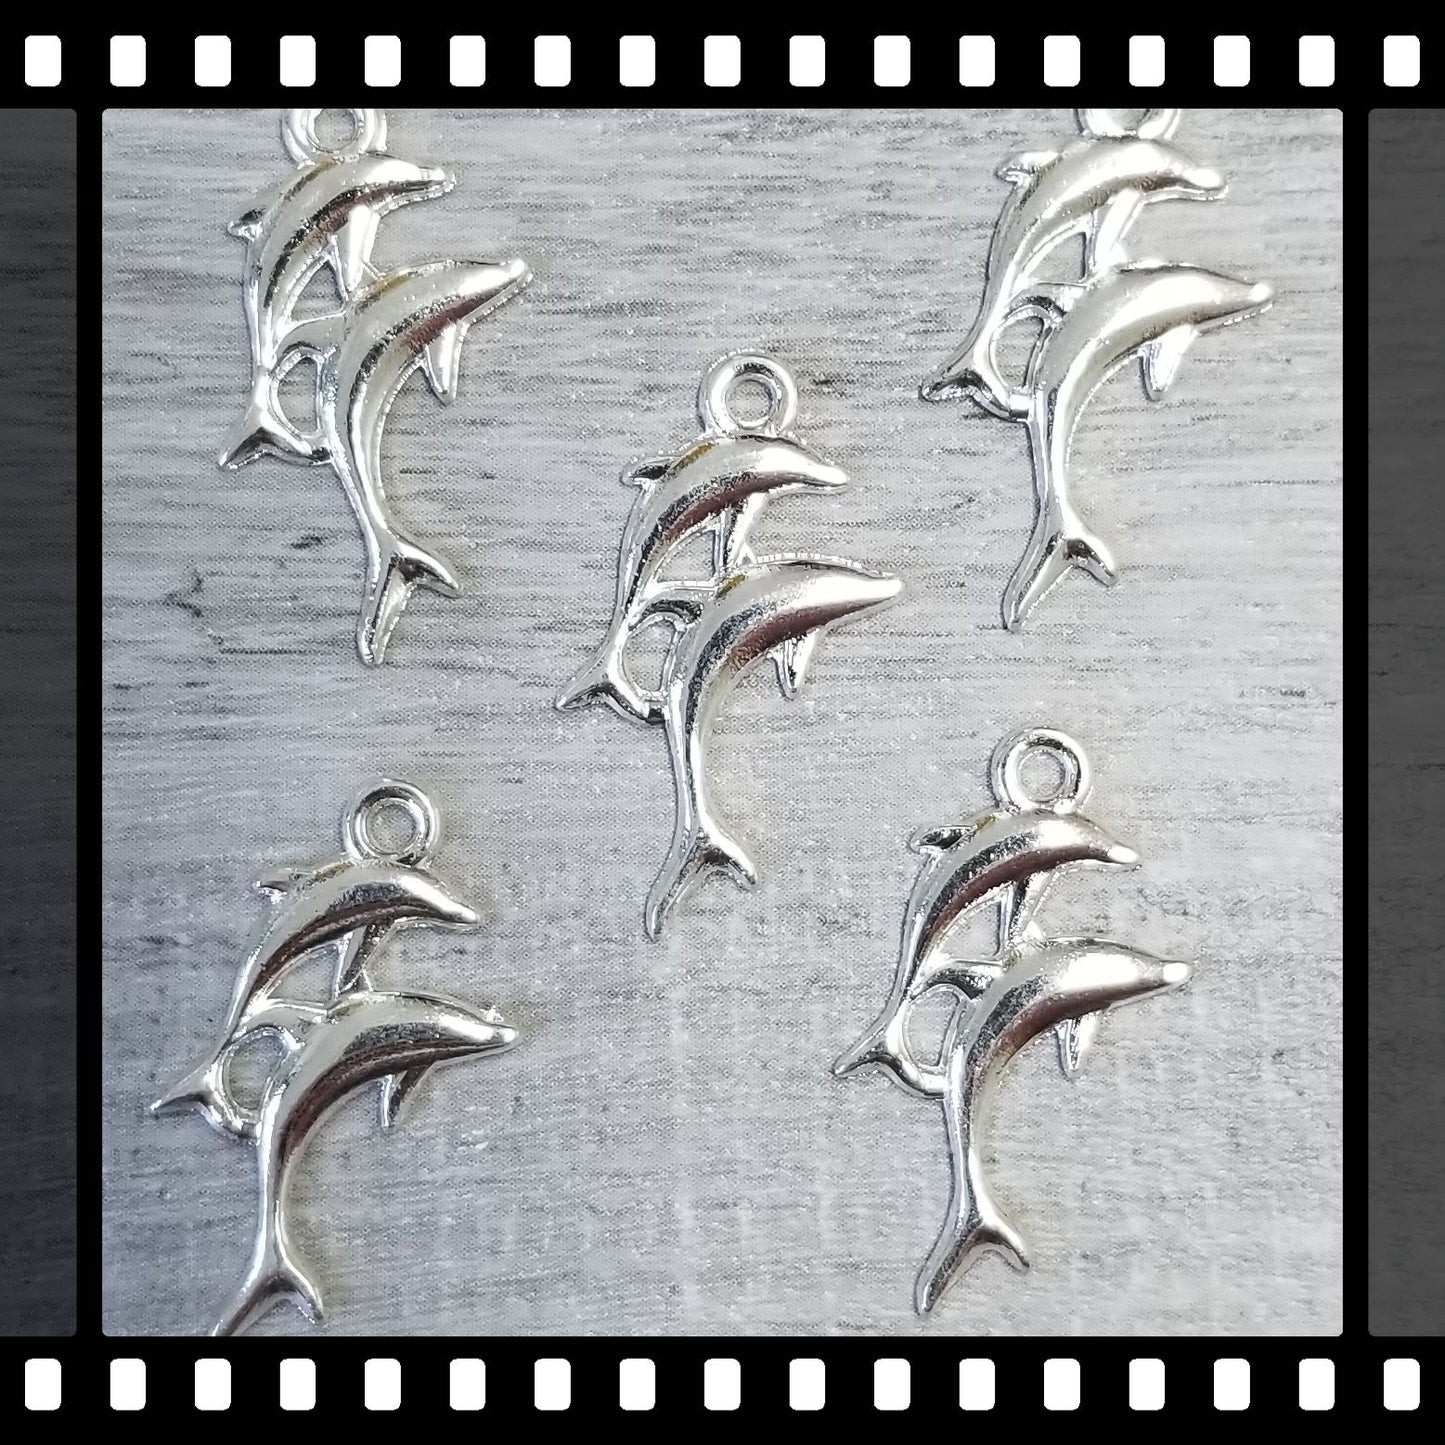 Small Dolphin Charms (5)